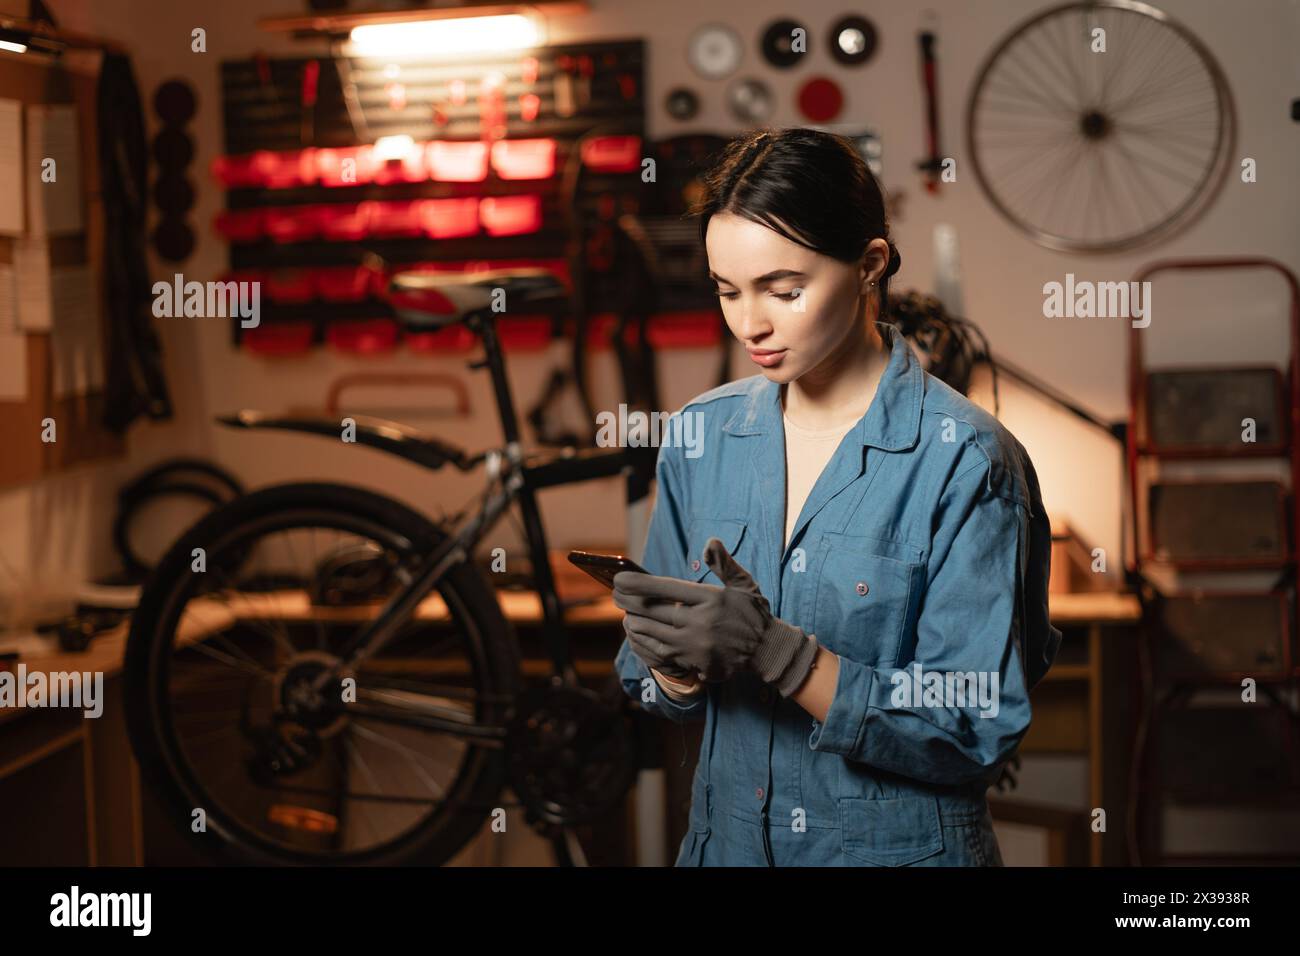 Mechanic reading a message on smartphone in bicycle workshop, she is repairing or servicing in a garage Stock Photo